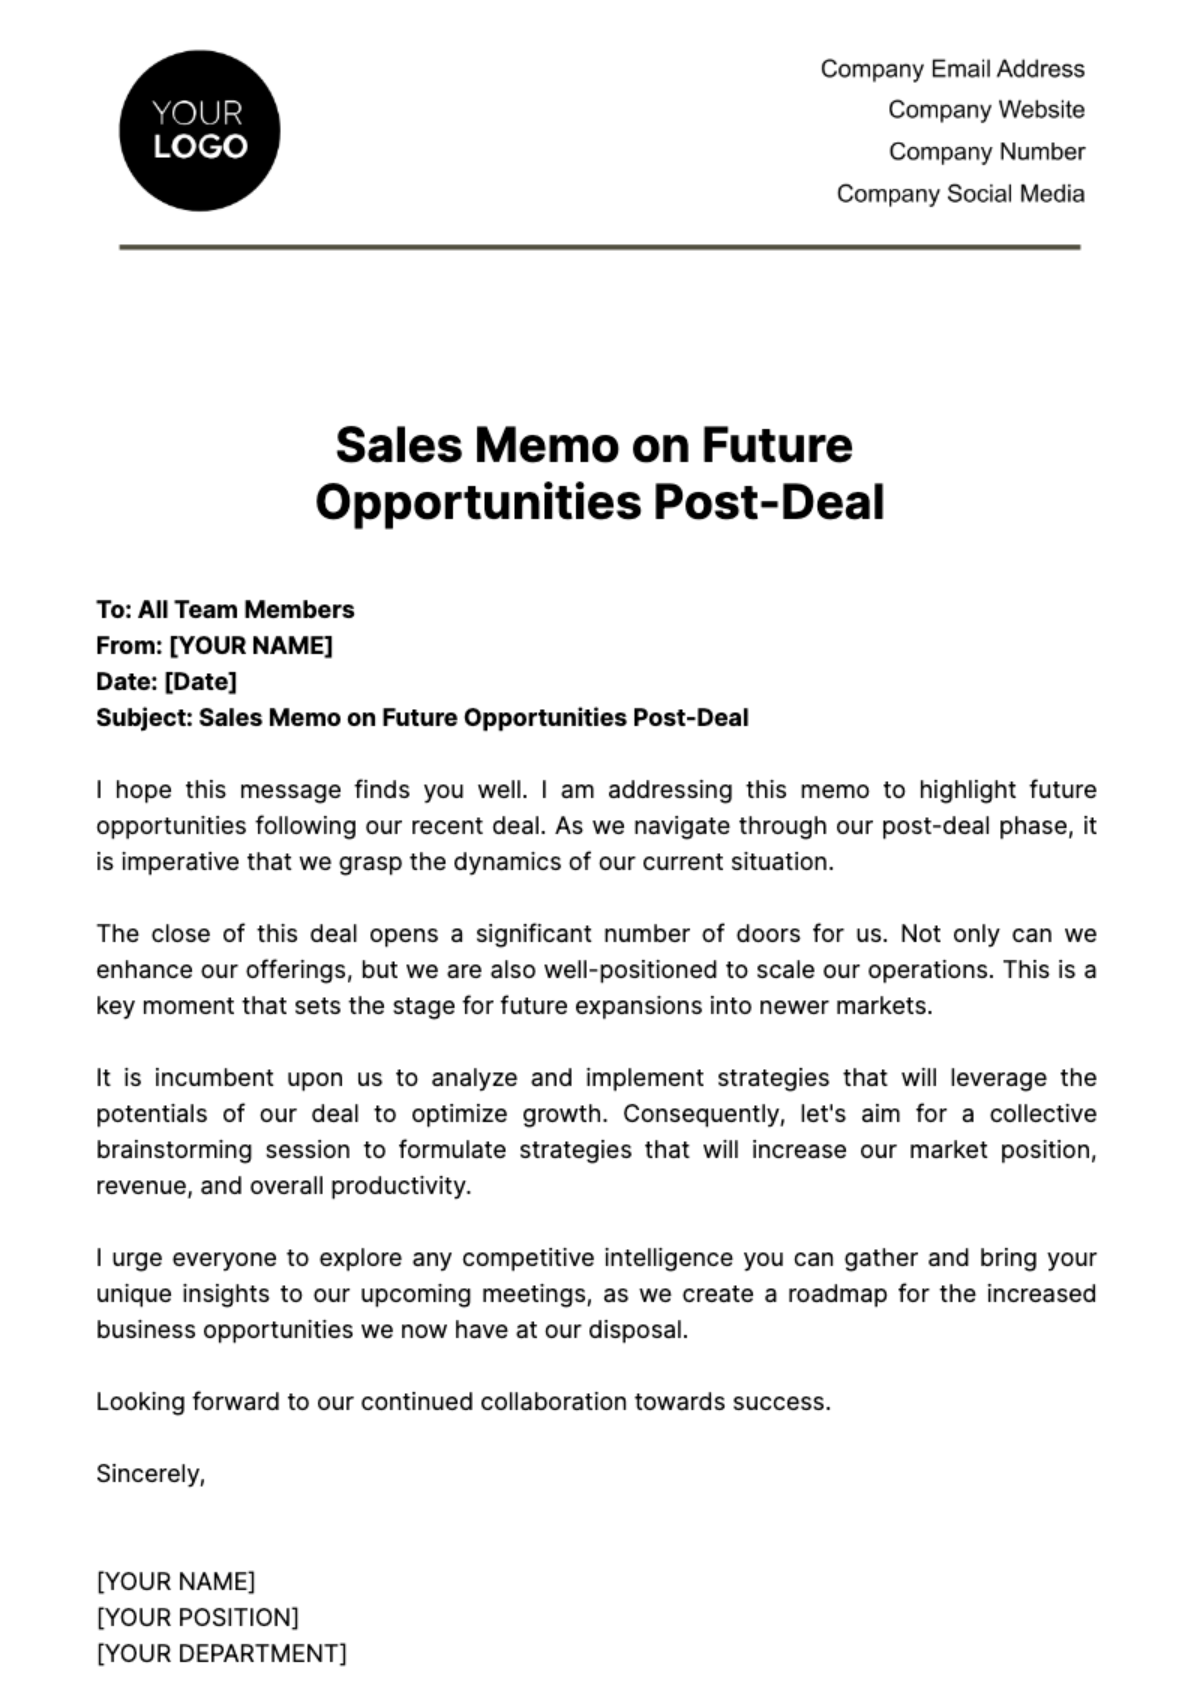 Free Sales Memo on Future Opportunities Post-Deal Template